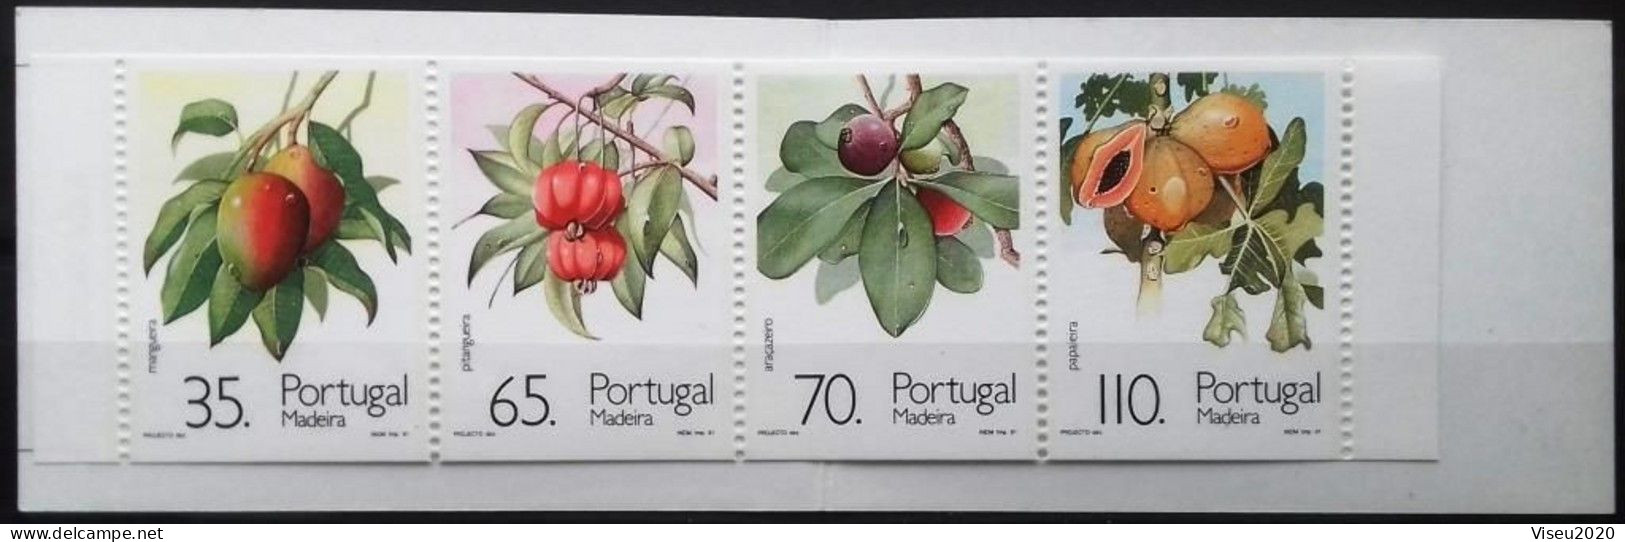 Portugal Booklet  Afinsa 79 -MADEIRA 1991 Fruits And Plants Of Subtropic Region MNH - Booklets